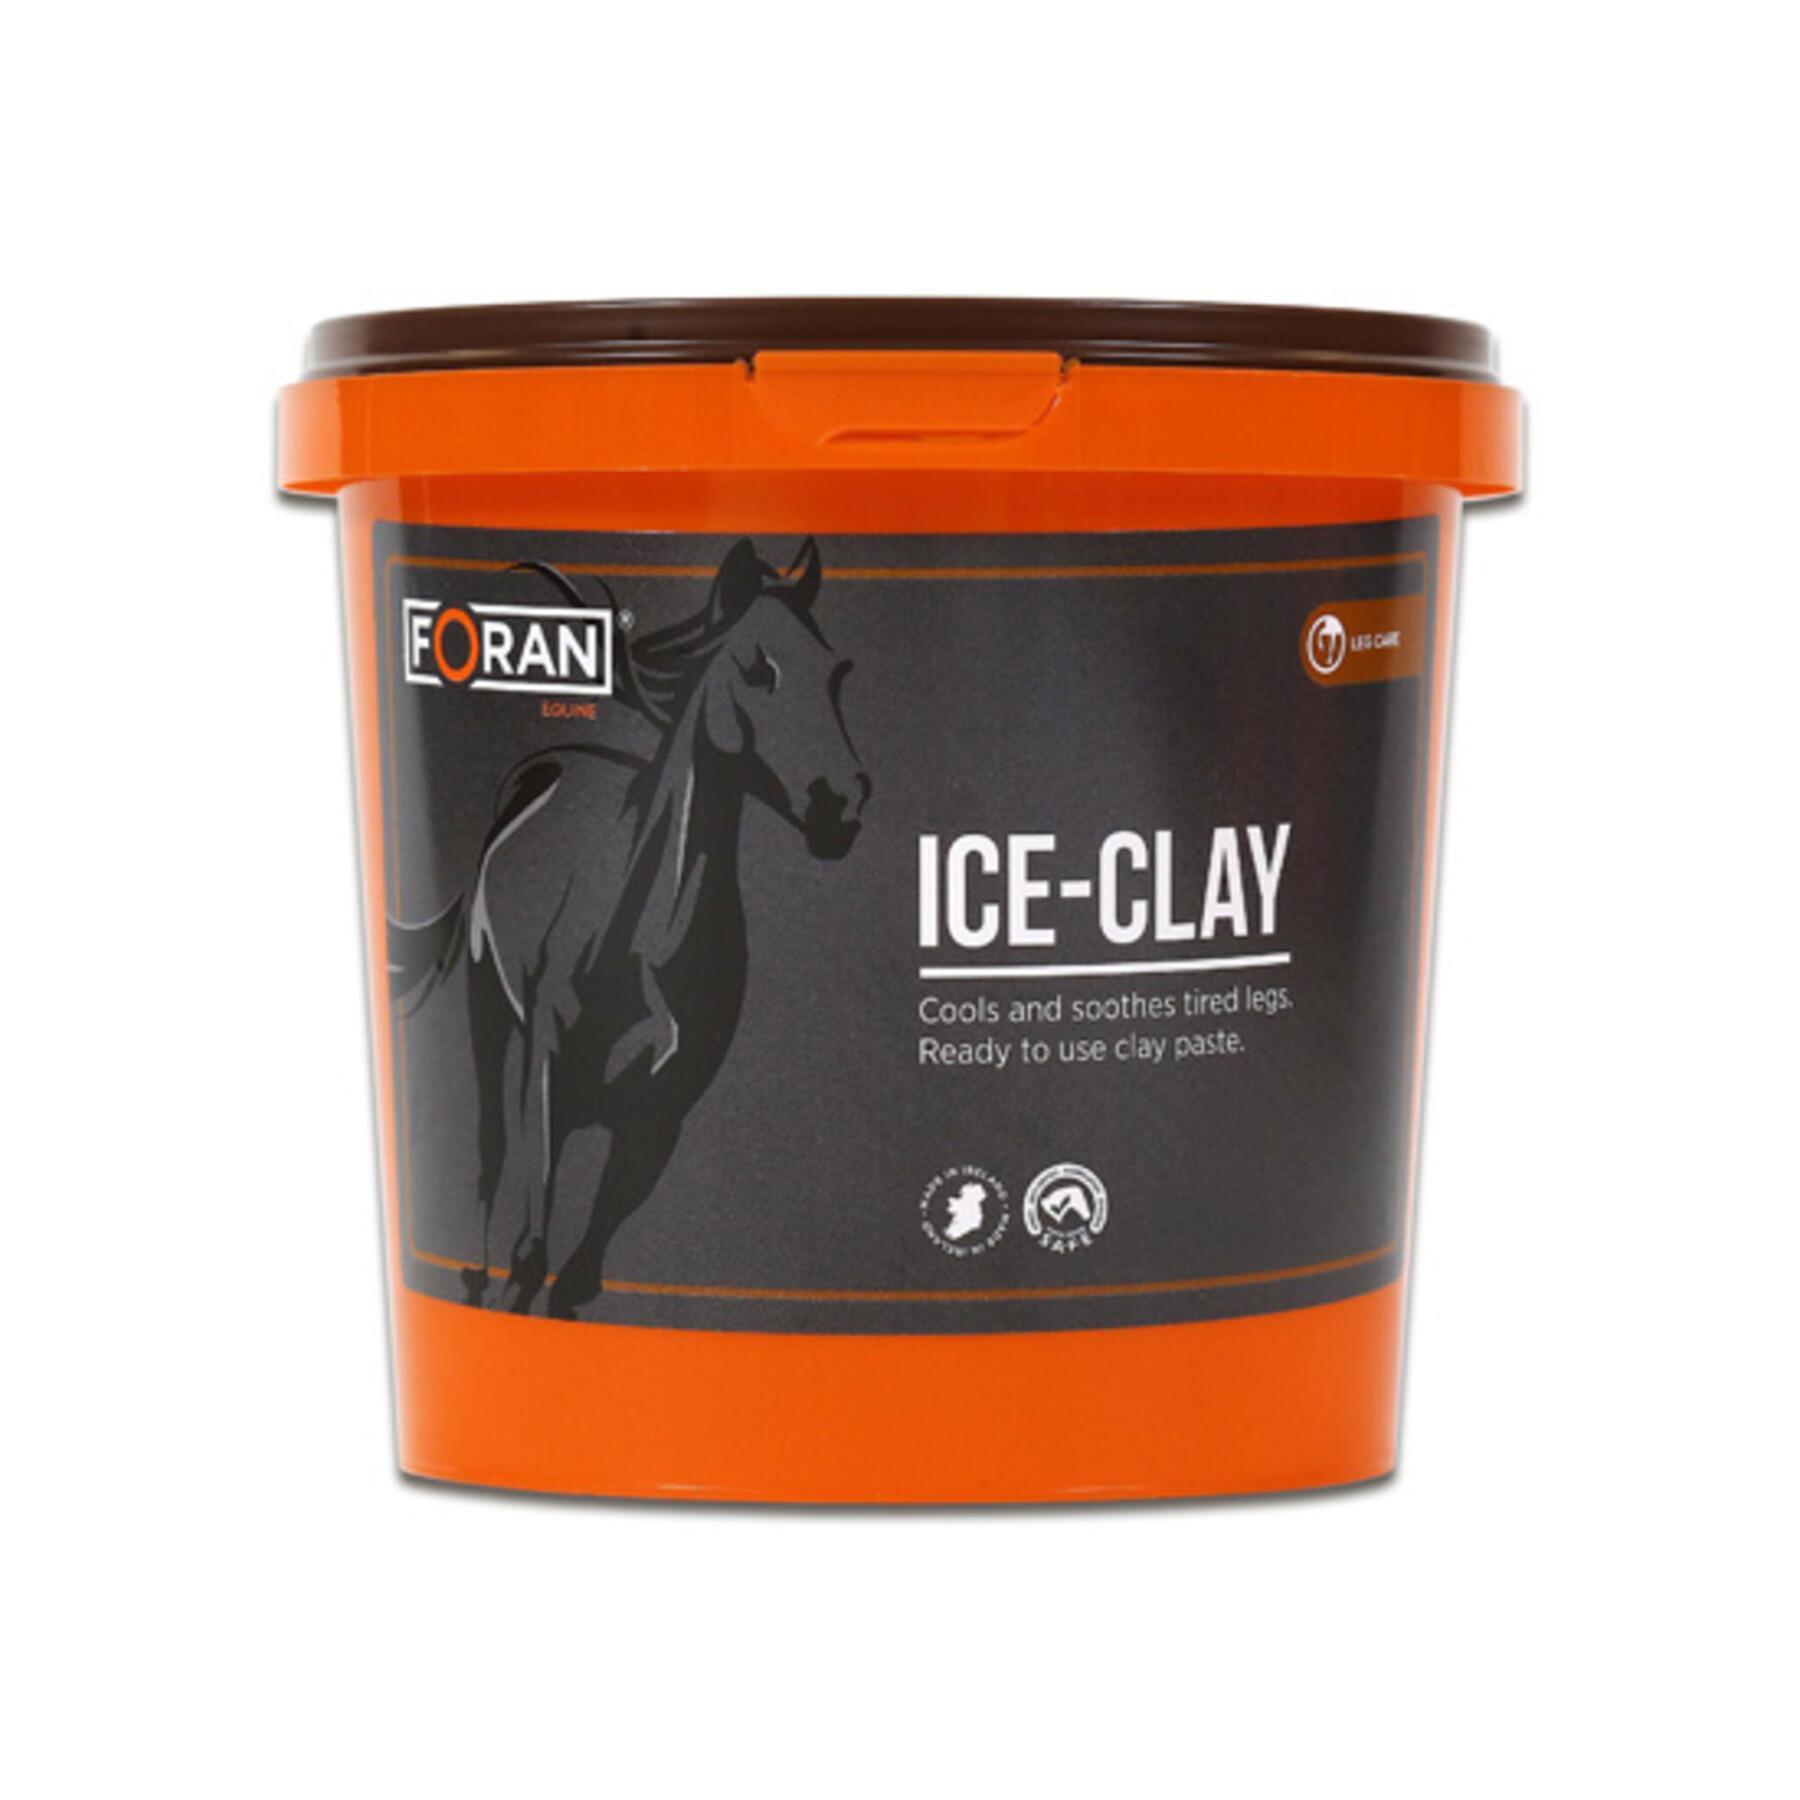 Clay Poultice Foran Ice Clay